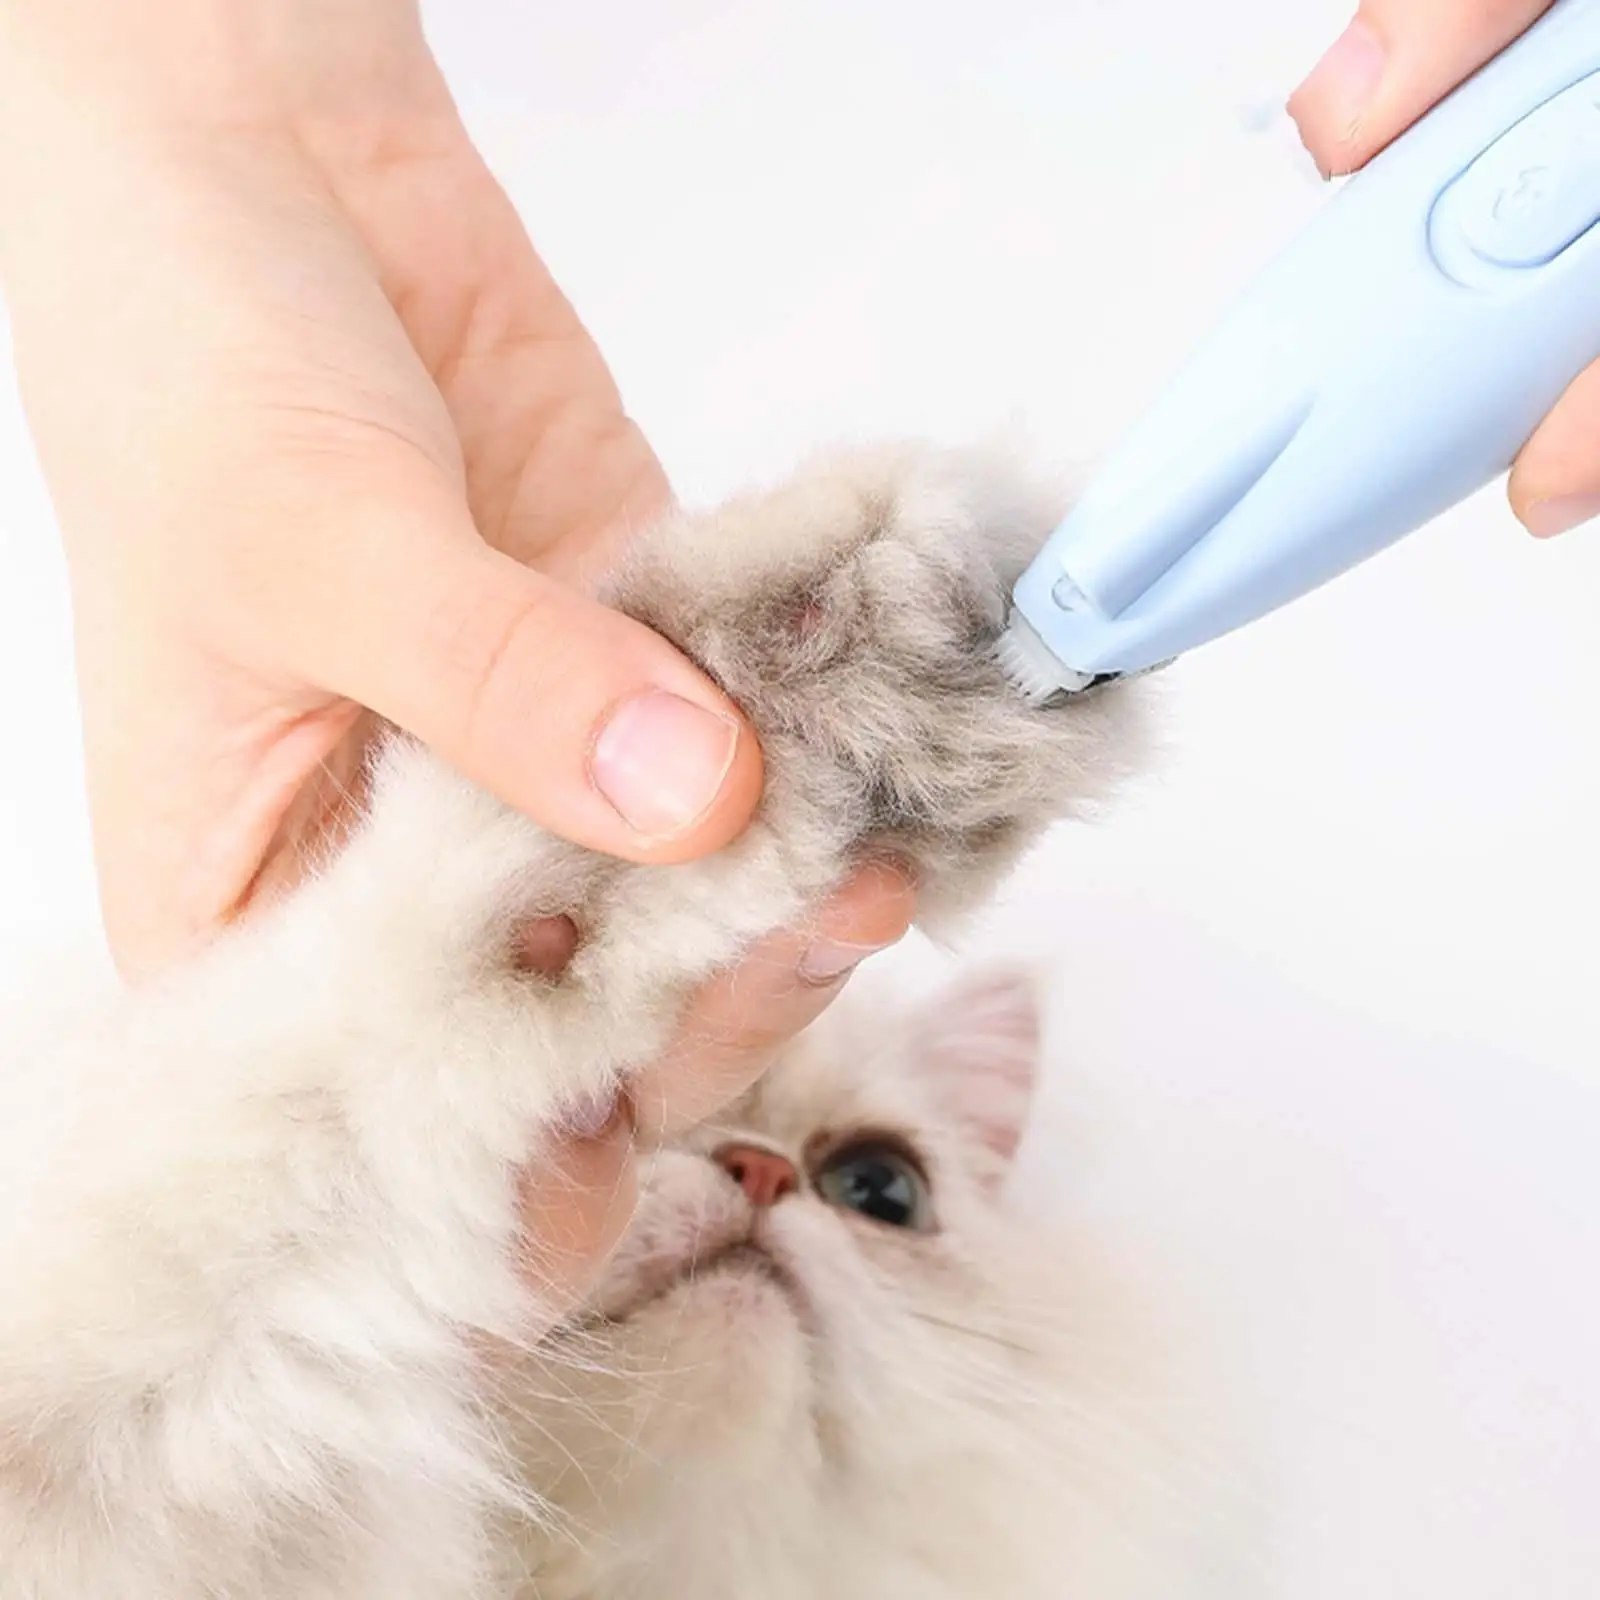 Portable Pet Nail Hair Trimmer Grinder Haircut Shearing Paw Low Noise Cat Dog Grooming Tool Grooming Clipper Cutter